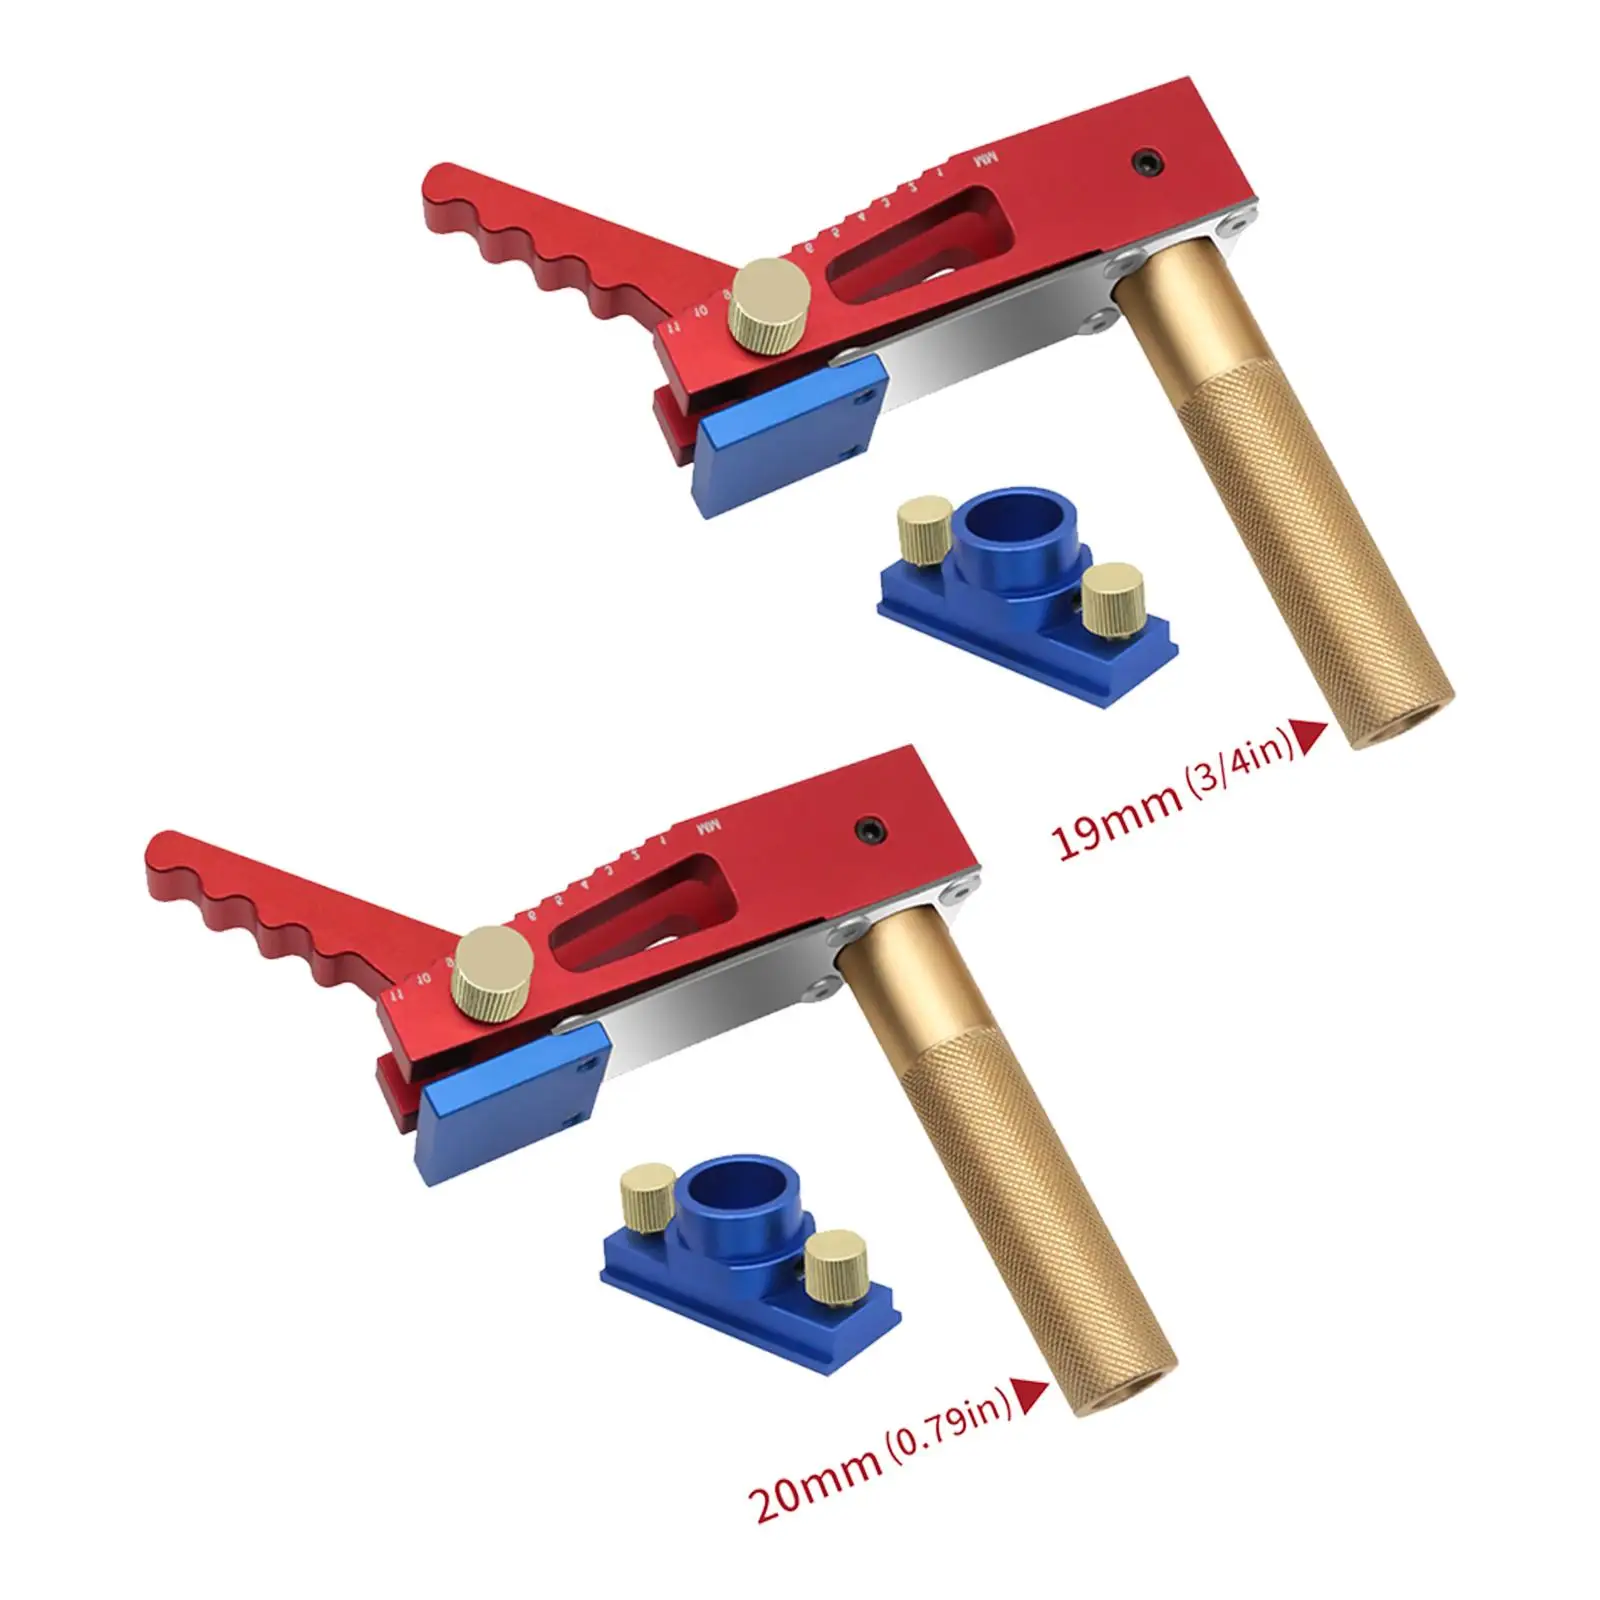 Hold Down Clamp Woodworking Backing Connector Benchtop Quick Clamps